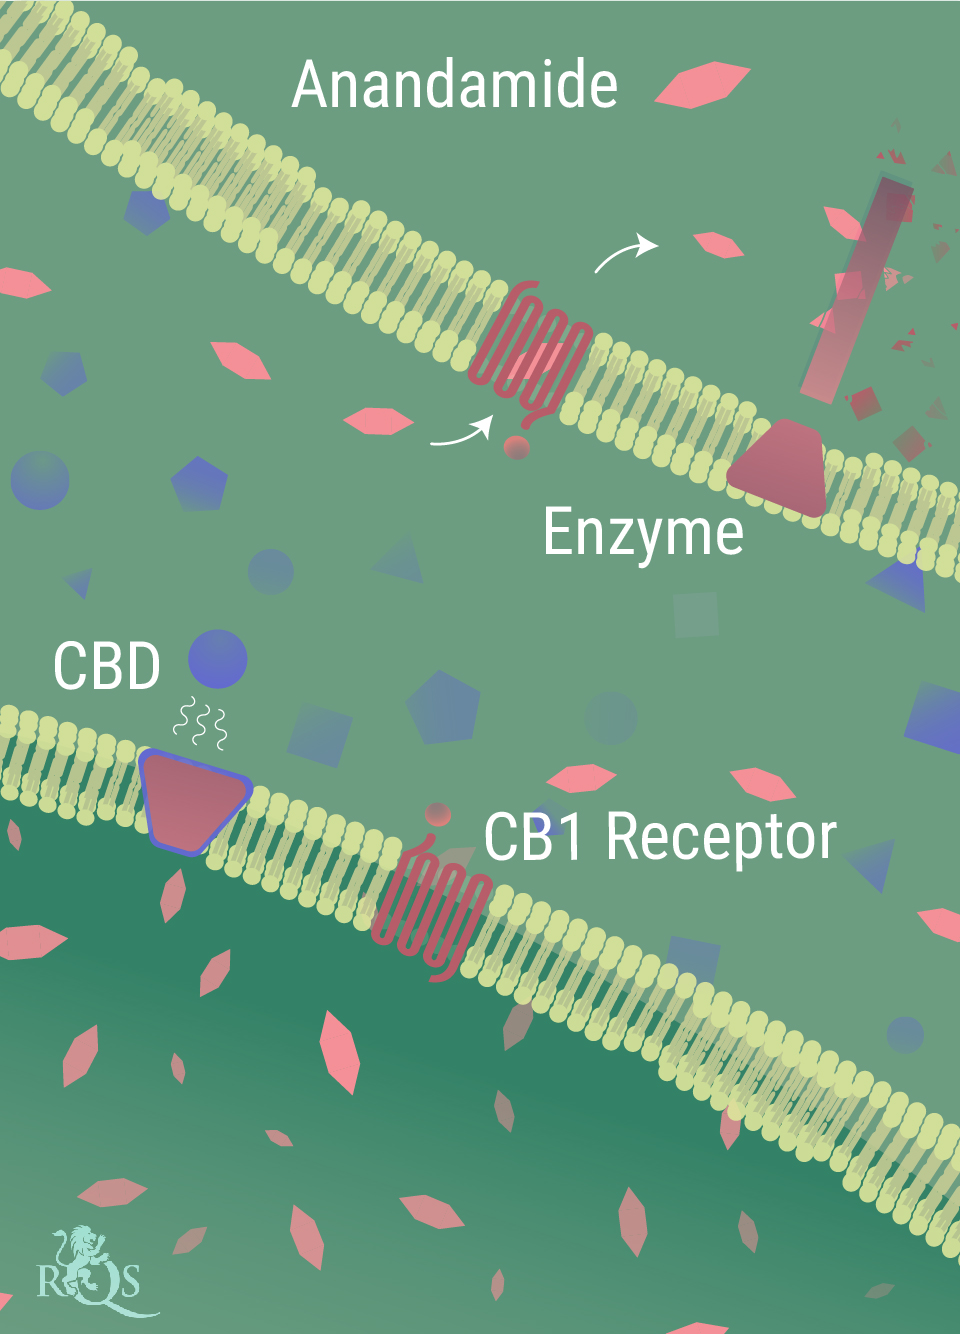 How Does CBD Interact With the Body?